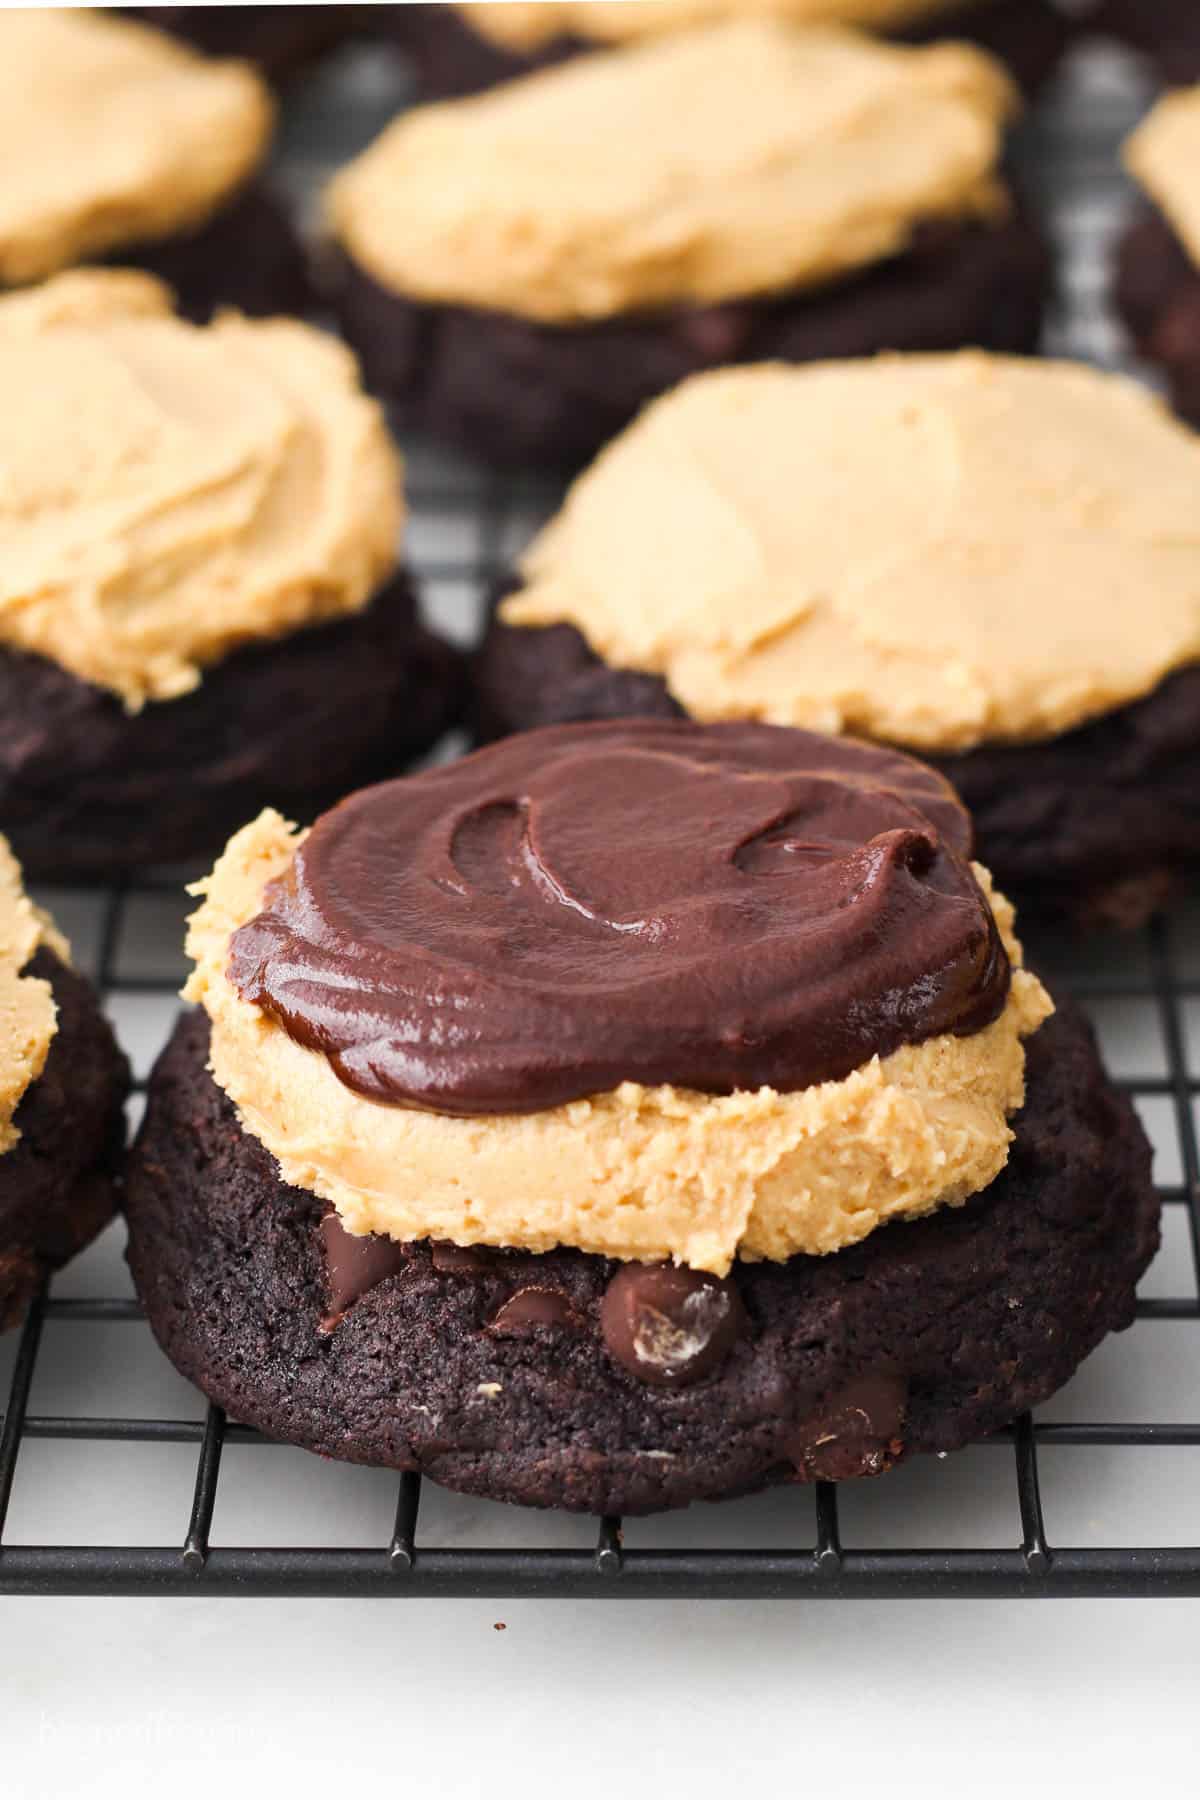 Chocolate cookies topped with a layer of peanut butter and chocolate ganache